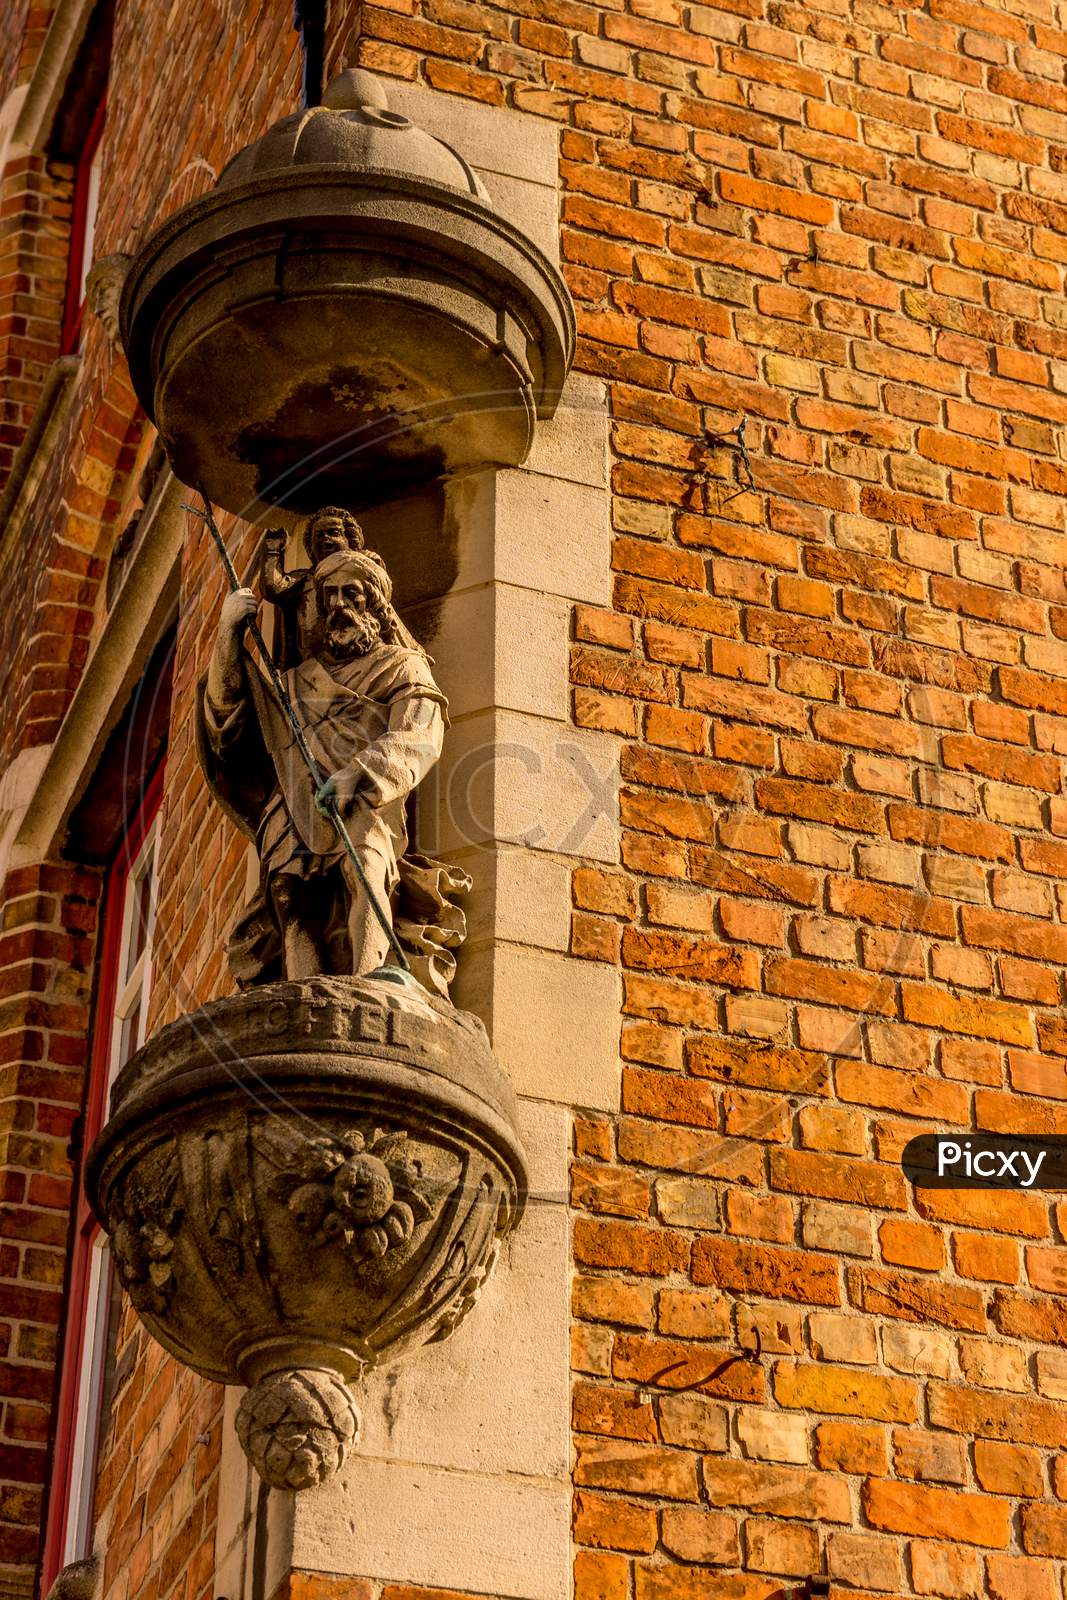 Belgium, Bruges, A Close Up Of A Brick Building With A Sculpture On A Wall